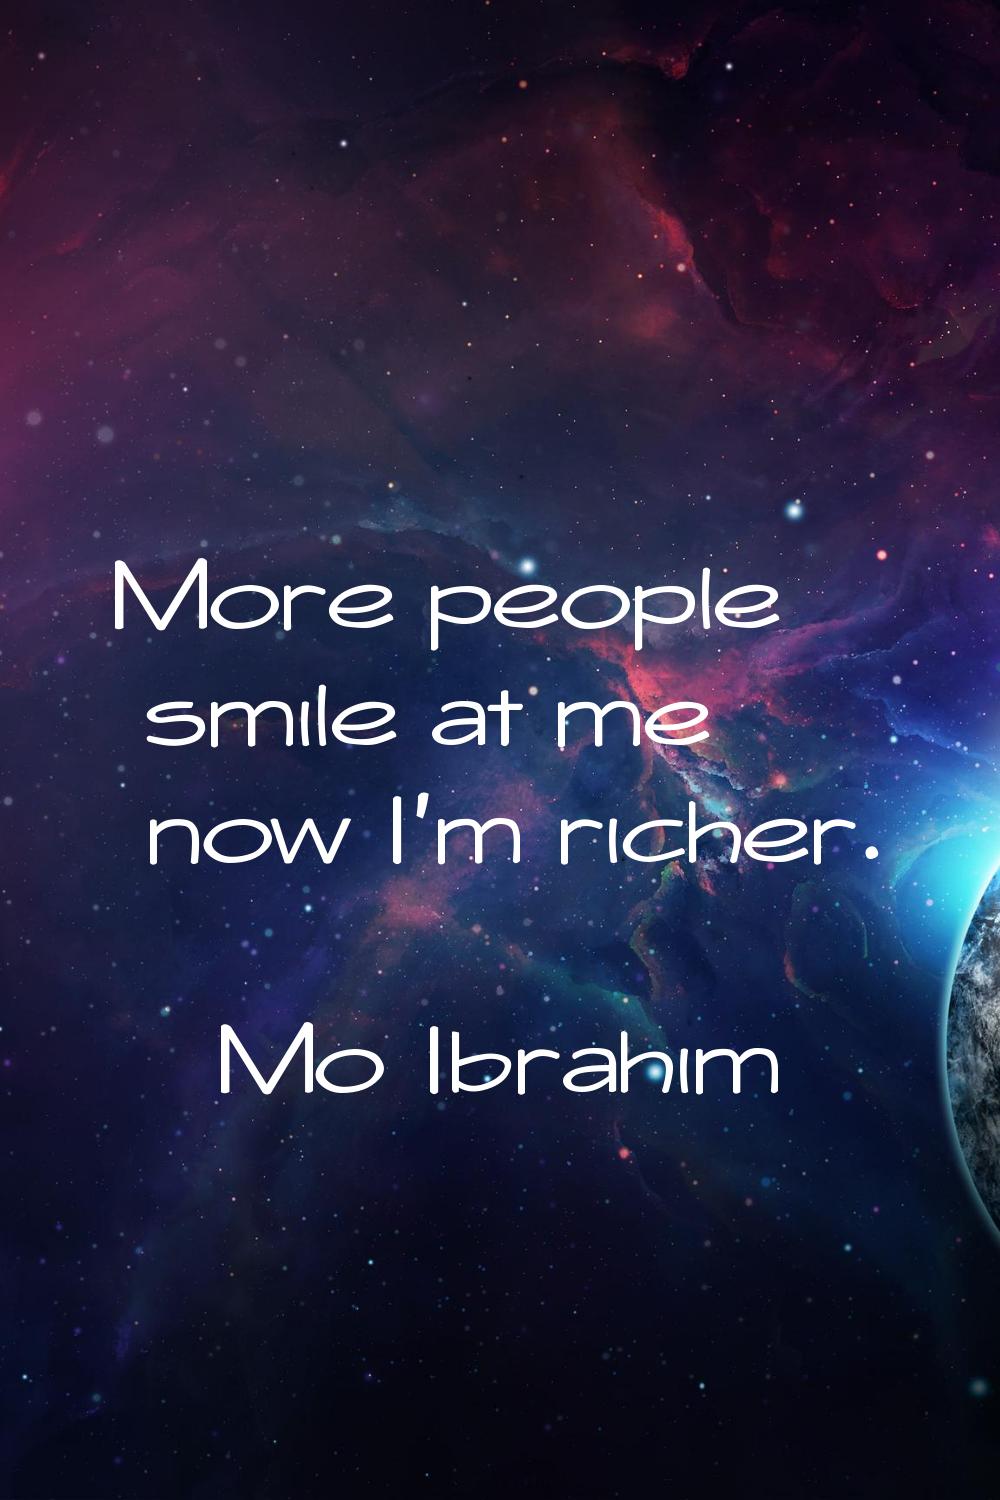 More people smile at me now I'm richer.